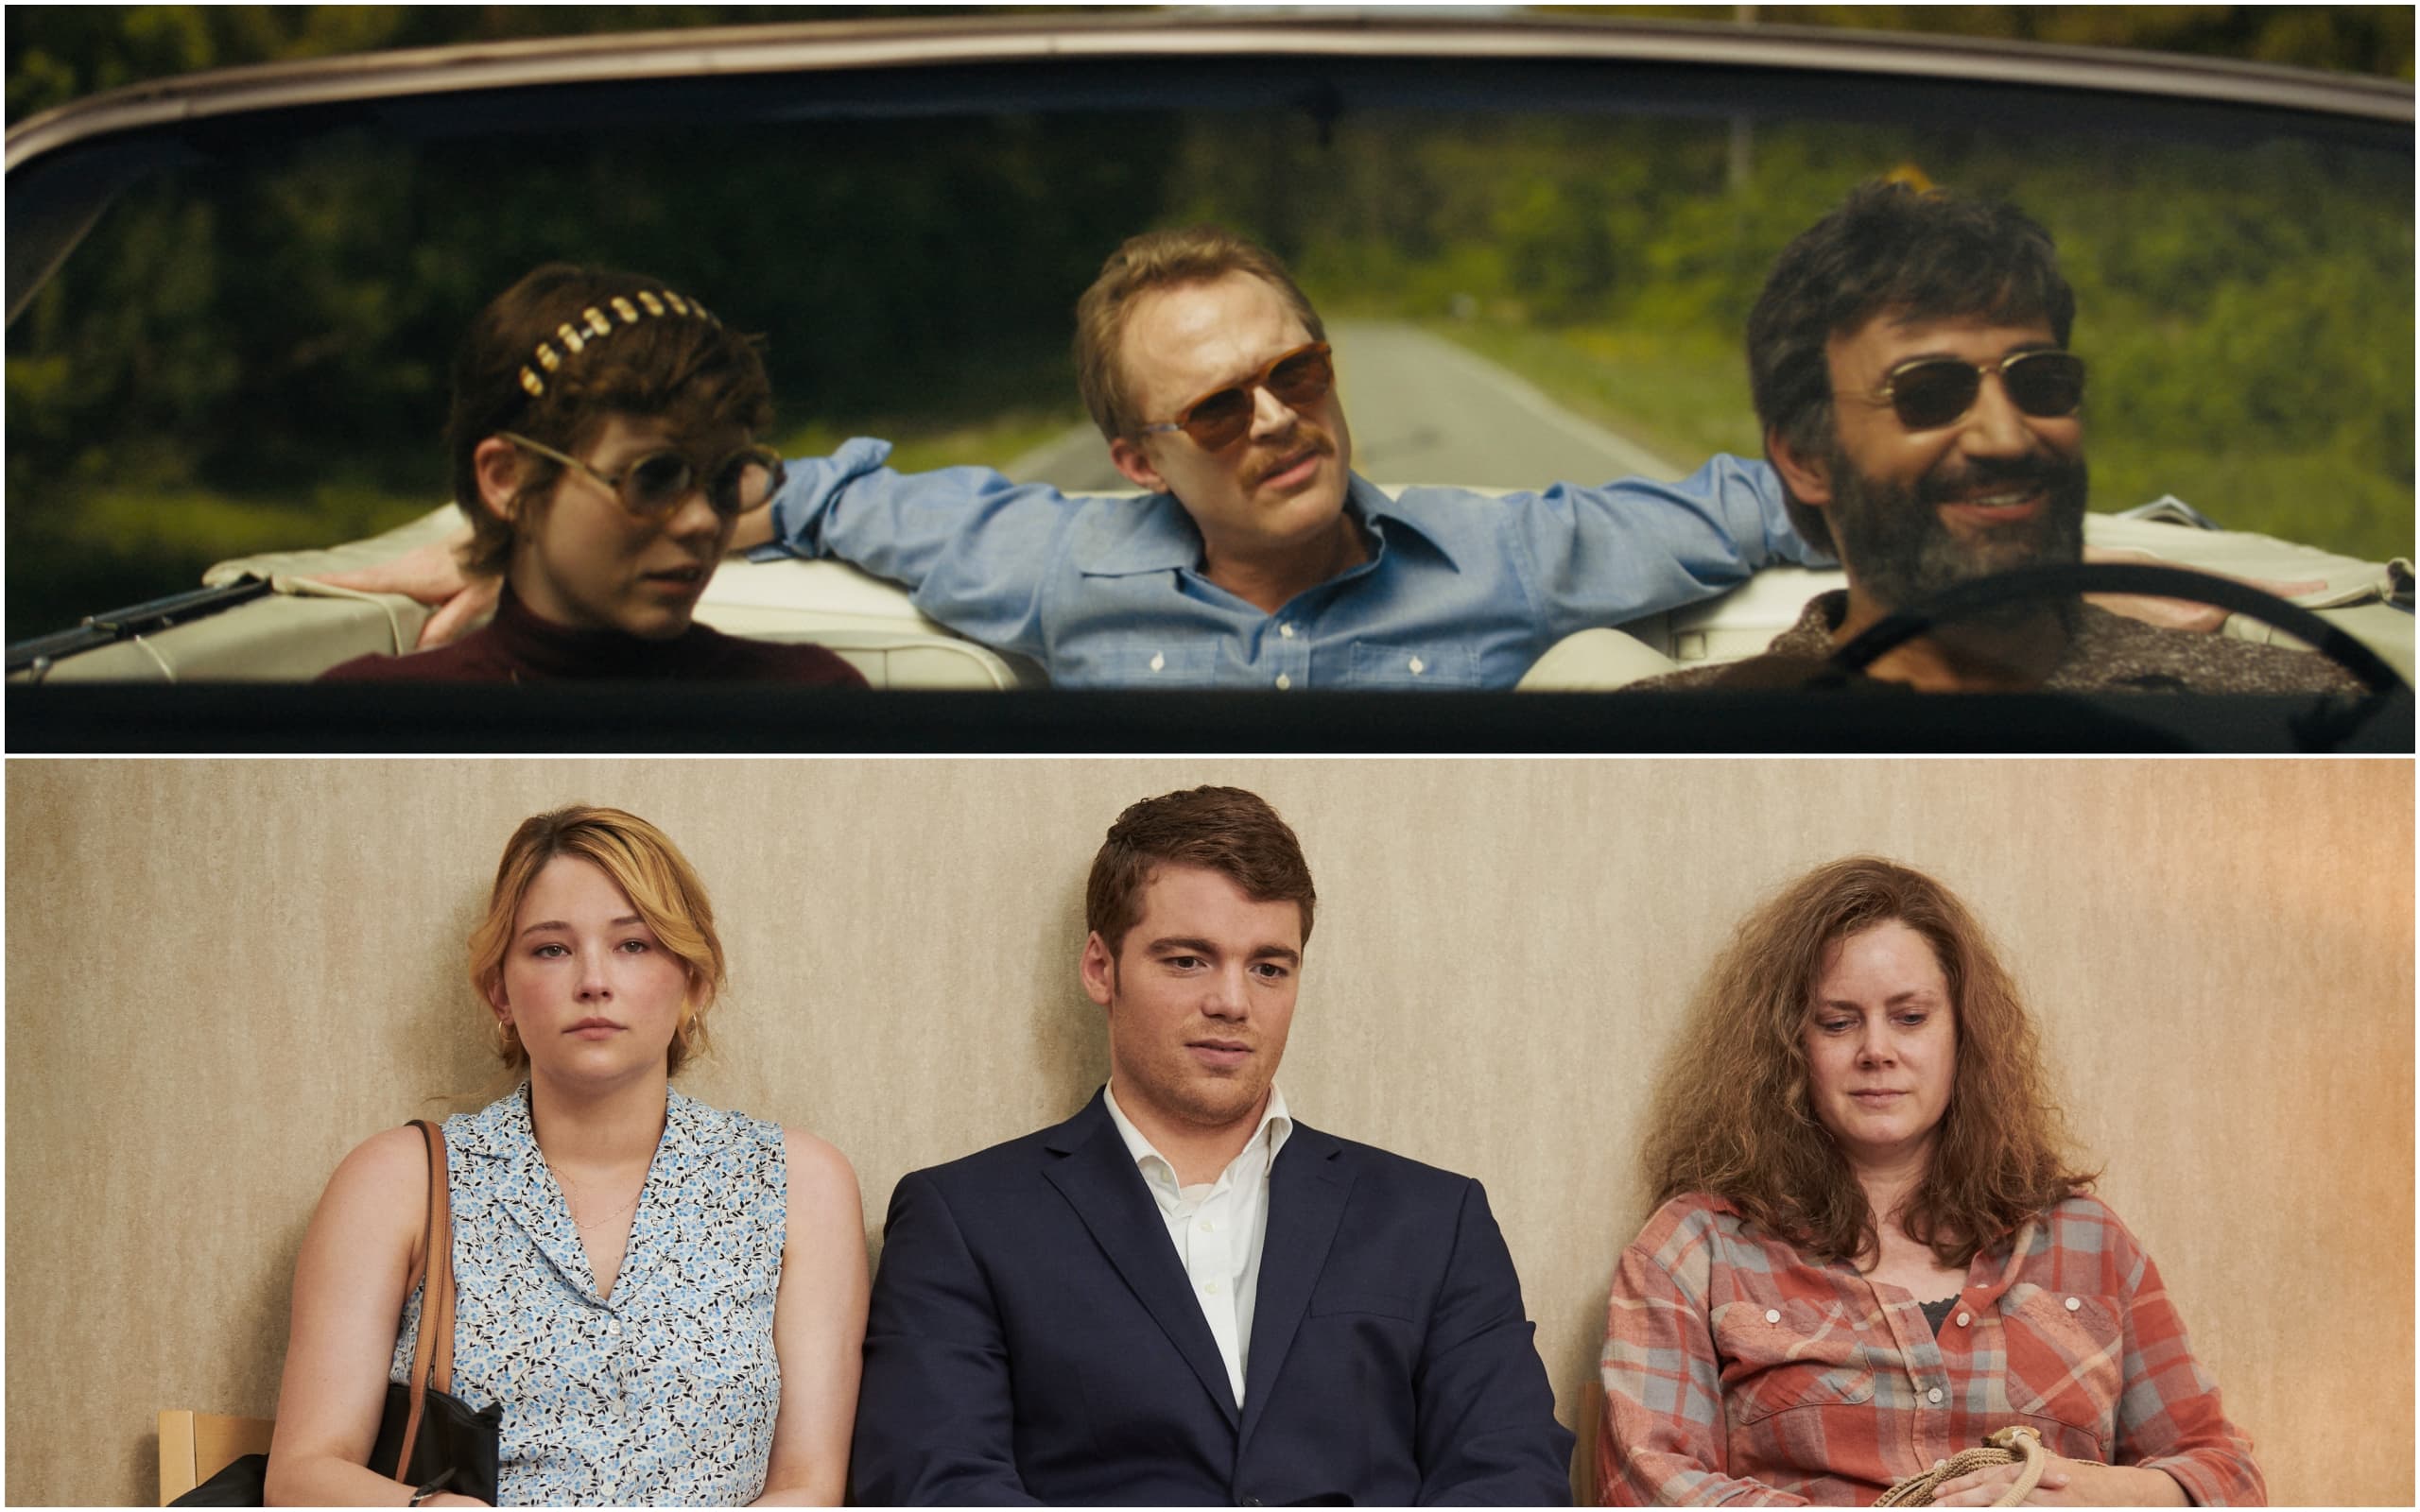 Top photo: Left to right, Sophia Lillis, Paul Bettany and Peter Macdissi in &quot;Uncle Frank.&quot; (Courtesy Amazon Studios) Bottom photo: Left to right:,Haley Bennett, Gabriel Basso and Amy Adams in &quot;Hillbilly Elegy.&quot; (Courtesy Lacey Terrell/Netflix)